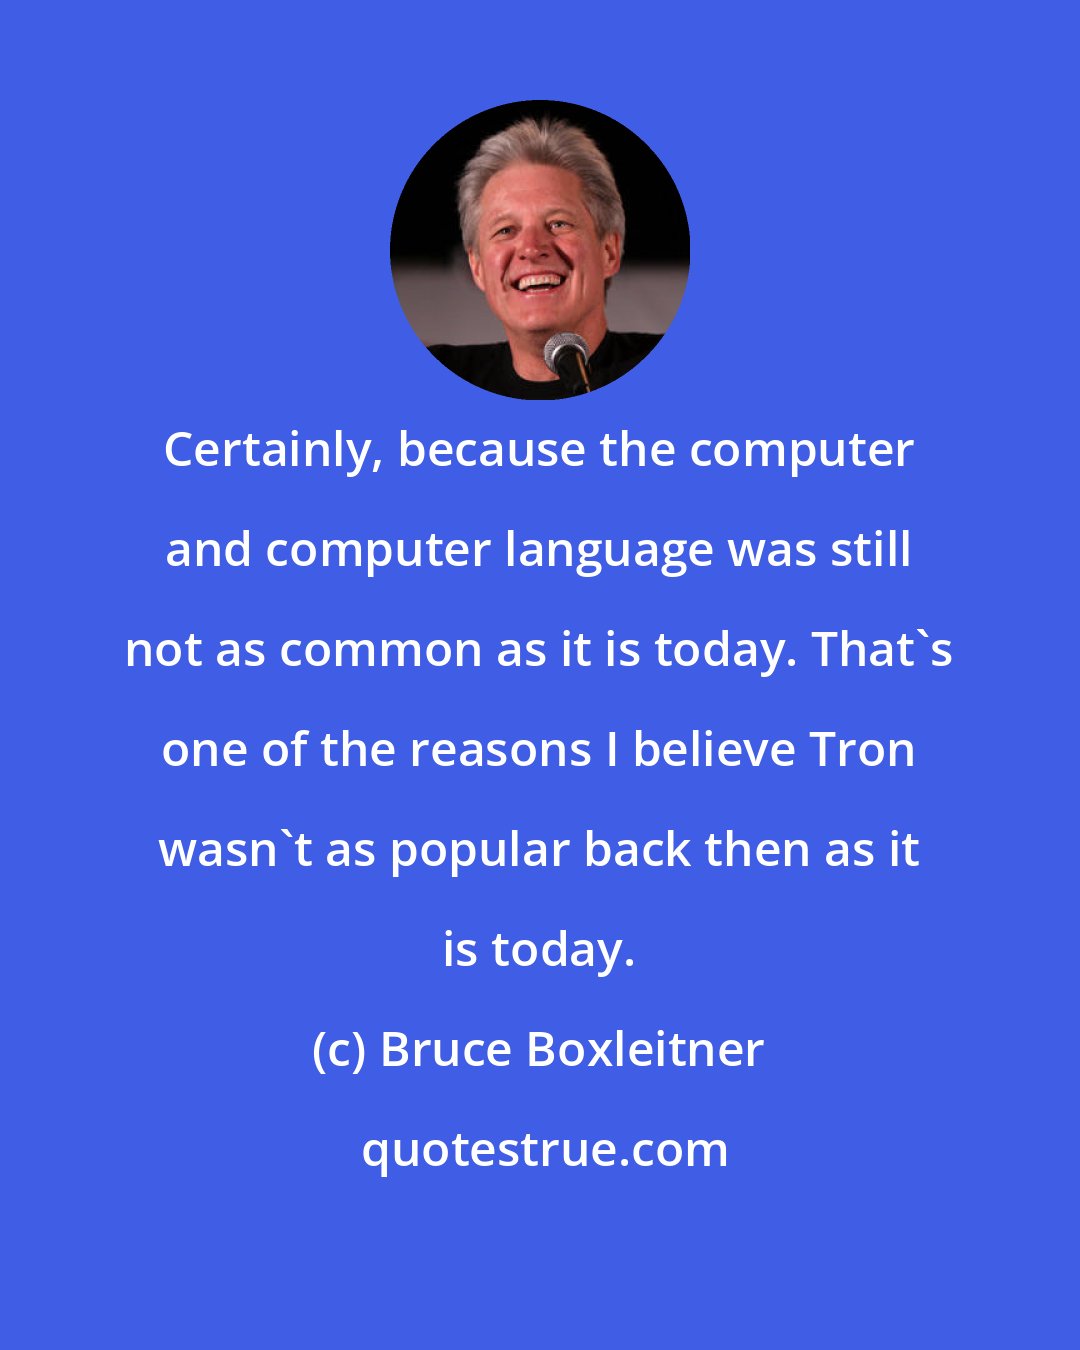 Bruce Boxleitner: Certainly, because the computer and computer language was still not as common as it is today. That's one of the reasons I believe Tron wasn't as popular back then as it is today.